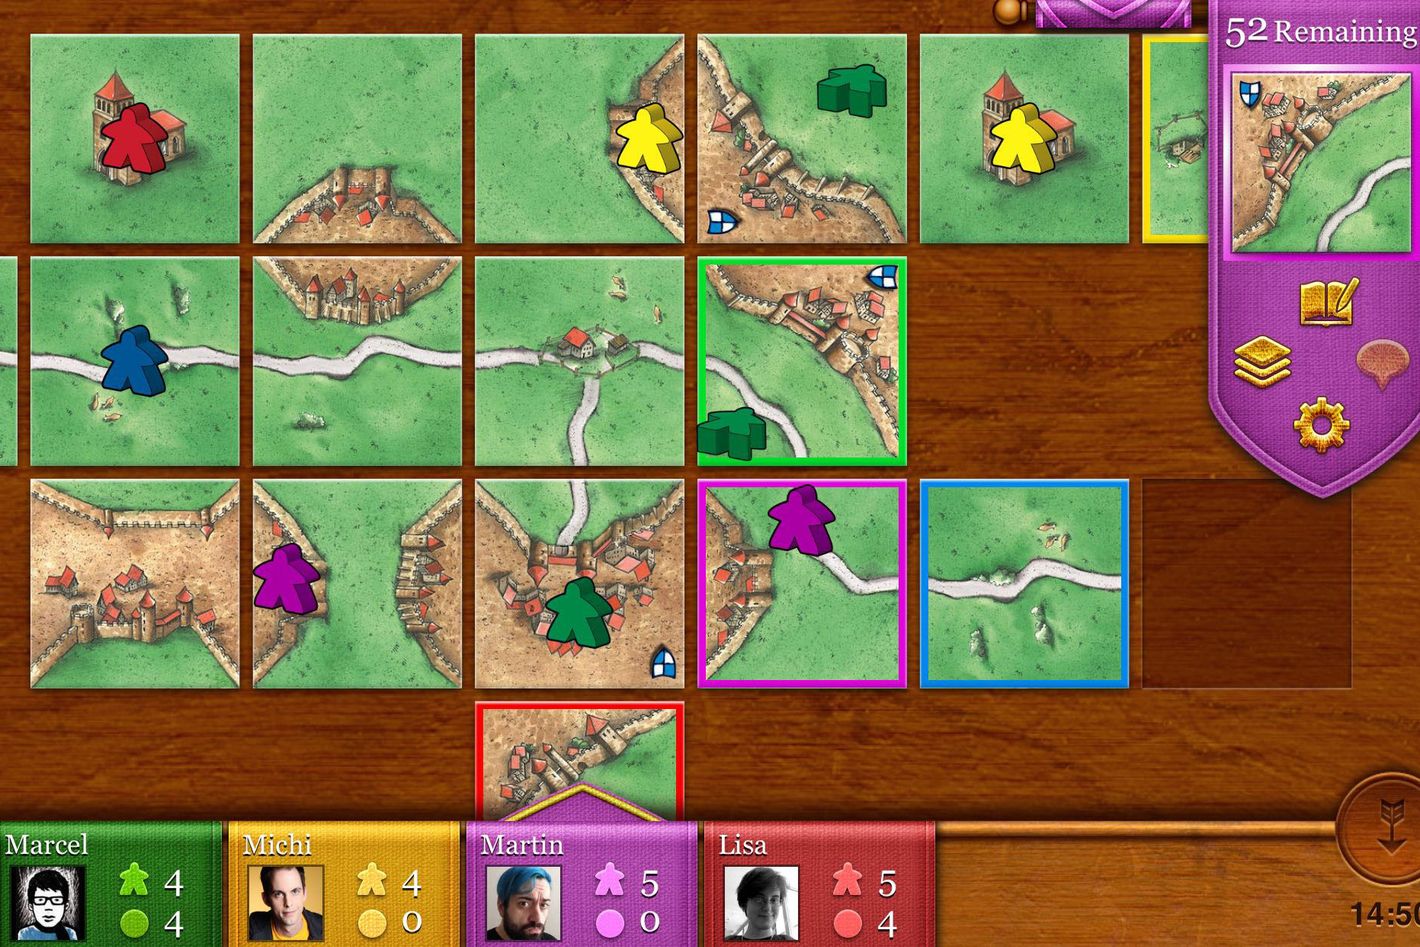 The 25 Best Board-Game Mobile Apps to Play Right Now